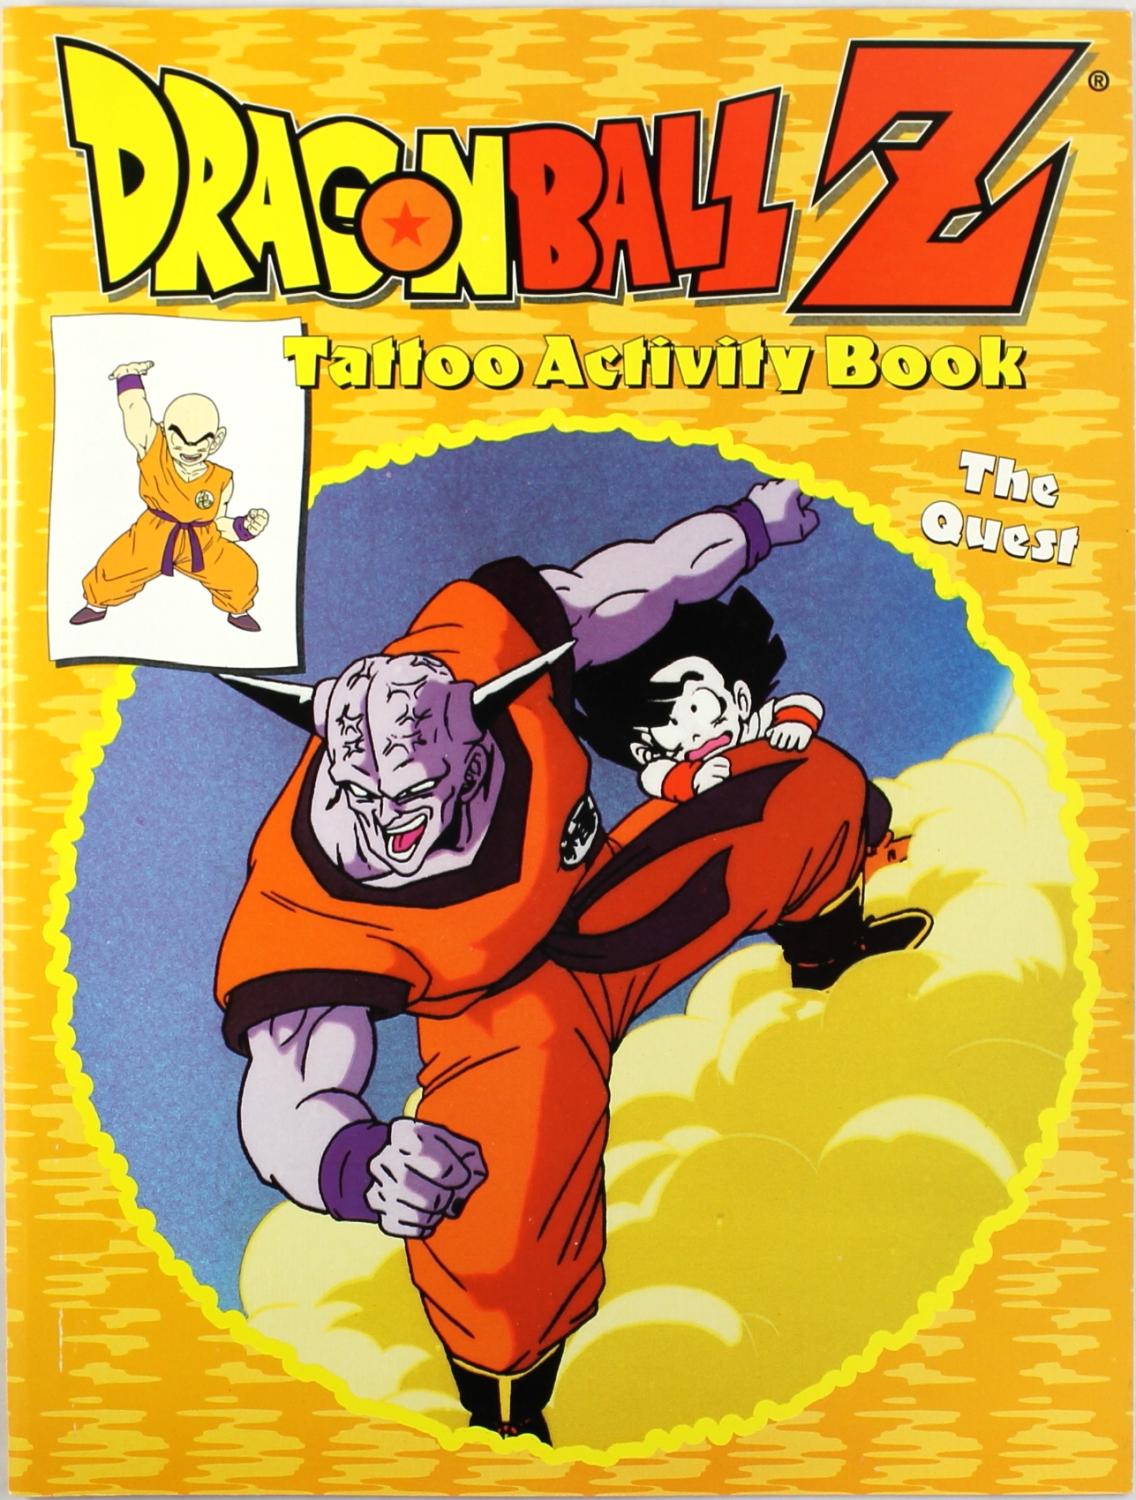 Dragonball Z Tattoo Activity Book The Quest Used Very Good Staple Bound 2000 Firefly Bookstore